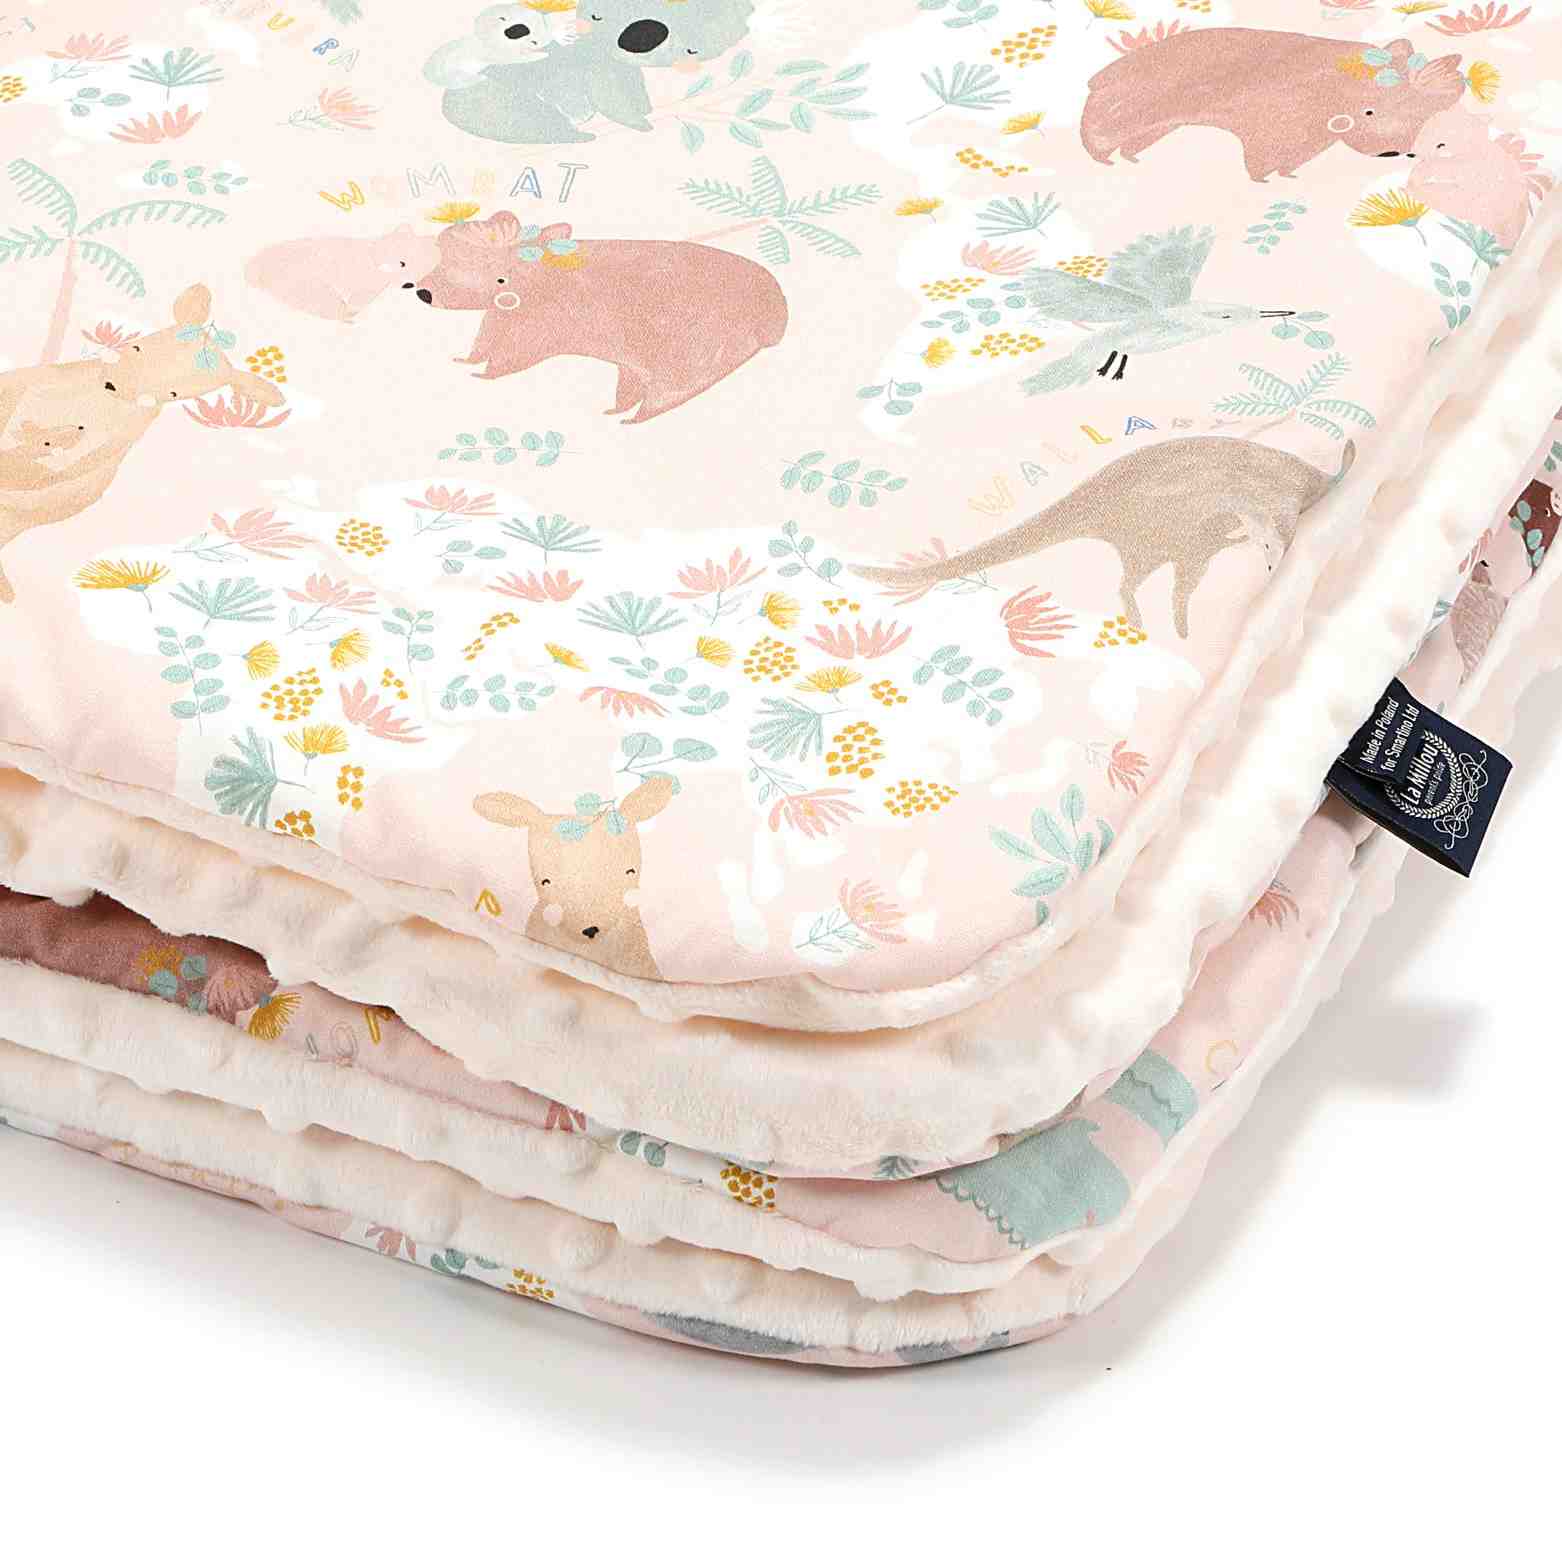 Cuddly baby blanket - Dundee and friends Pink-ecru